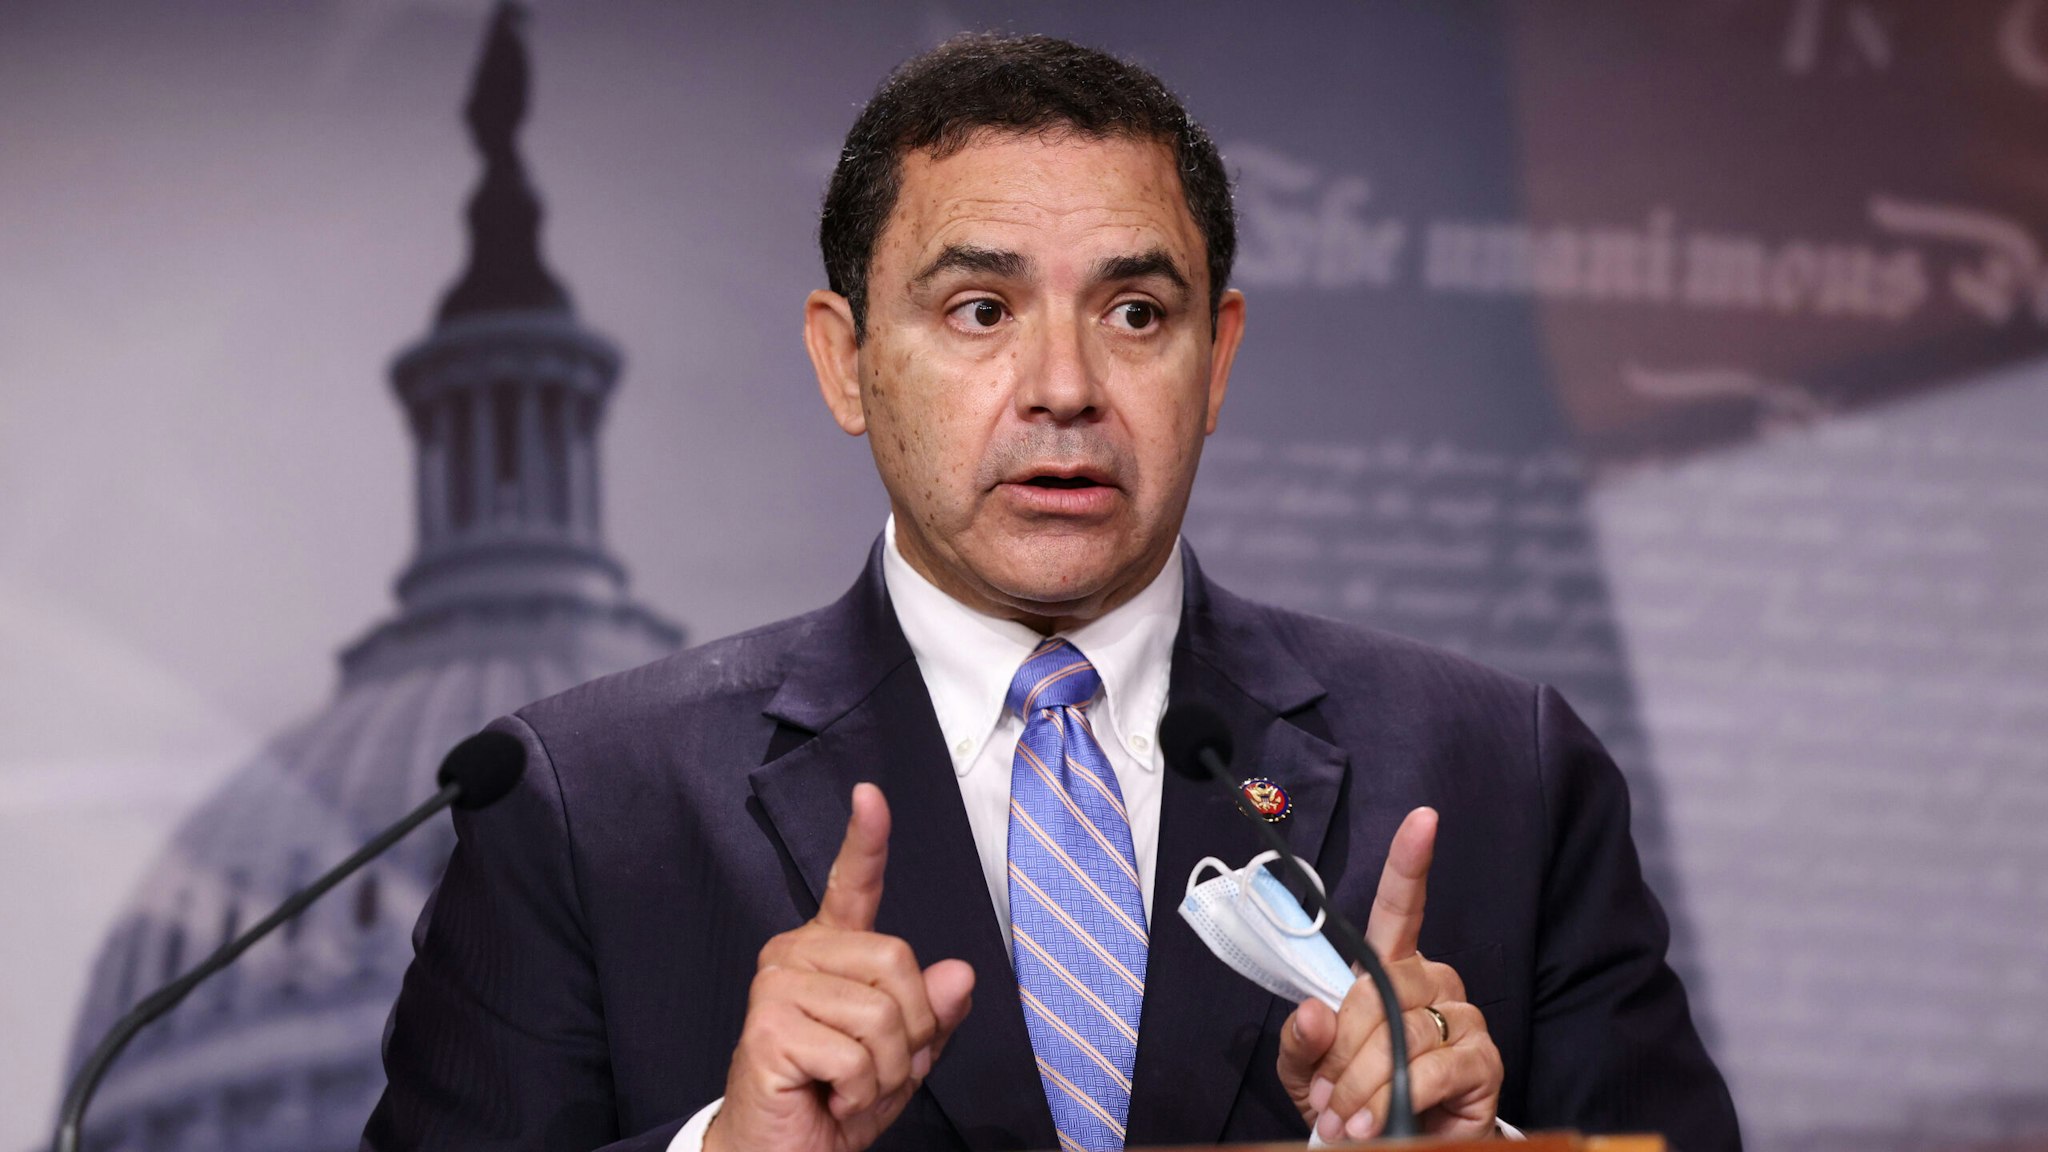 WASHINGTON, DC - JULY 30: U.S. Rep. Henry Cuellar (D-TX) speaks on southern border security and illegal immigration, during a news conference at the U.S. Capitol on July 30, 2021 in Washington, DC. Cuellar urged the Biden administration to name former Homeland Security Secretary Jeh Johnson as a border czar.